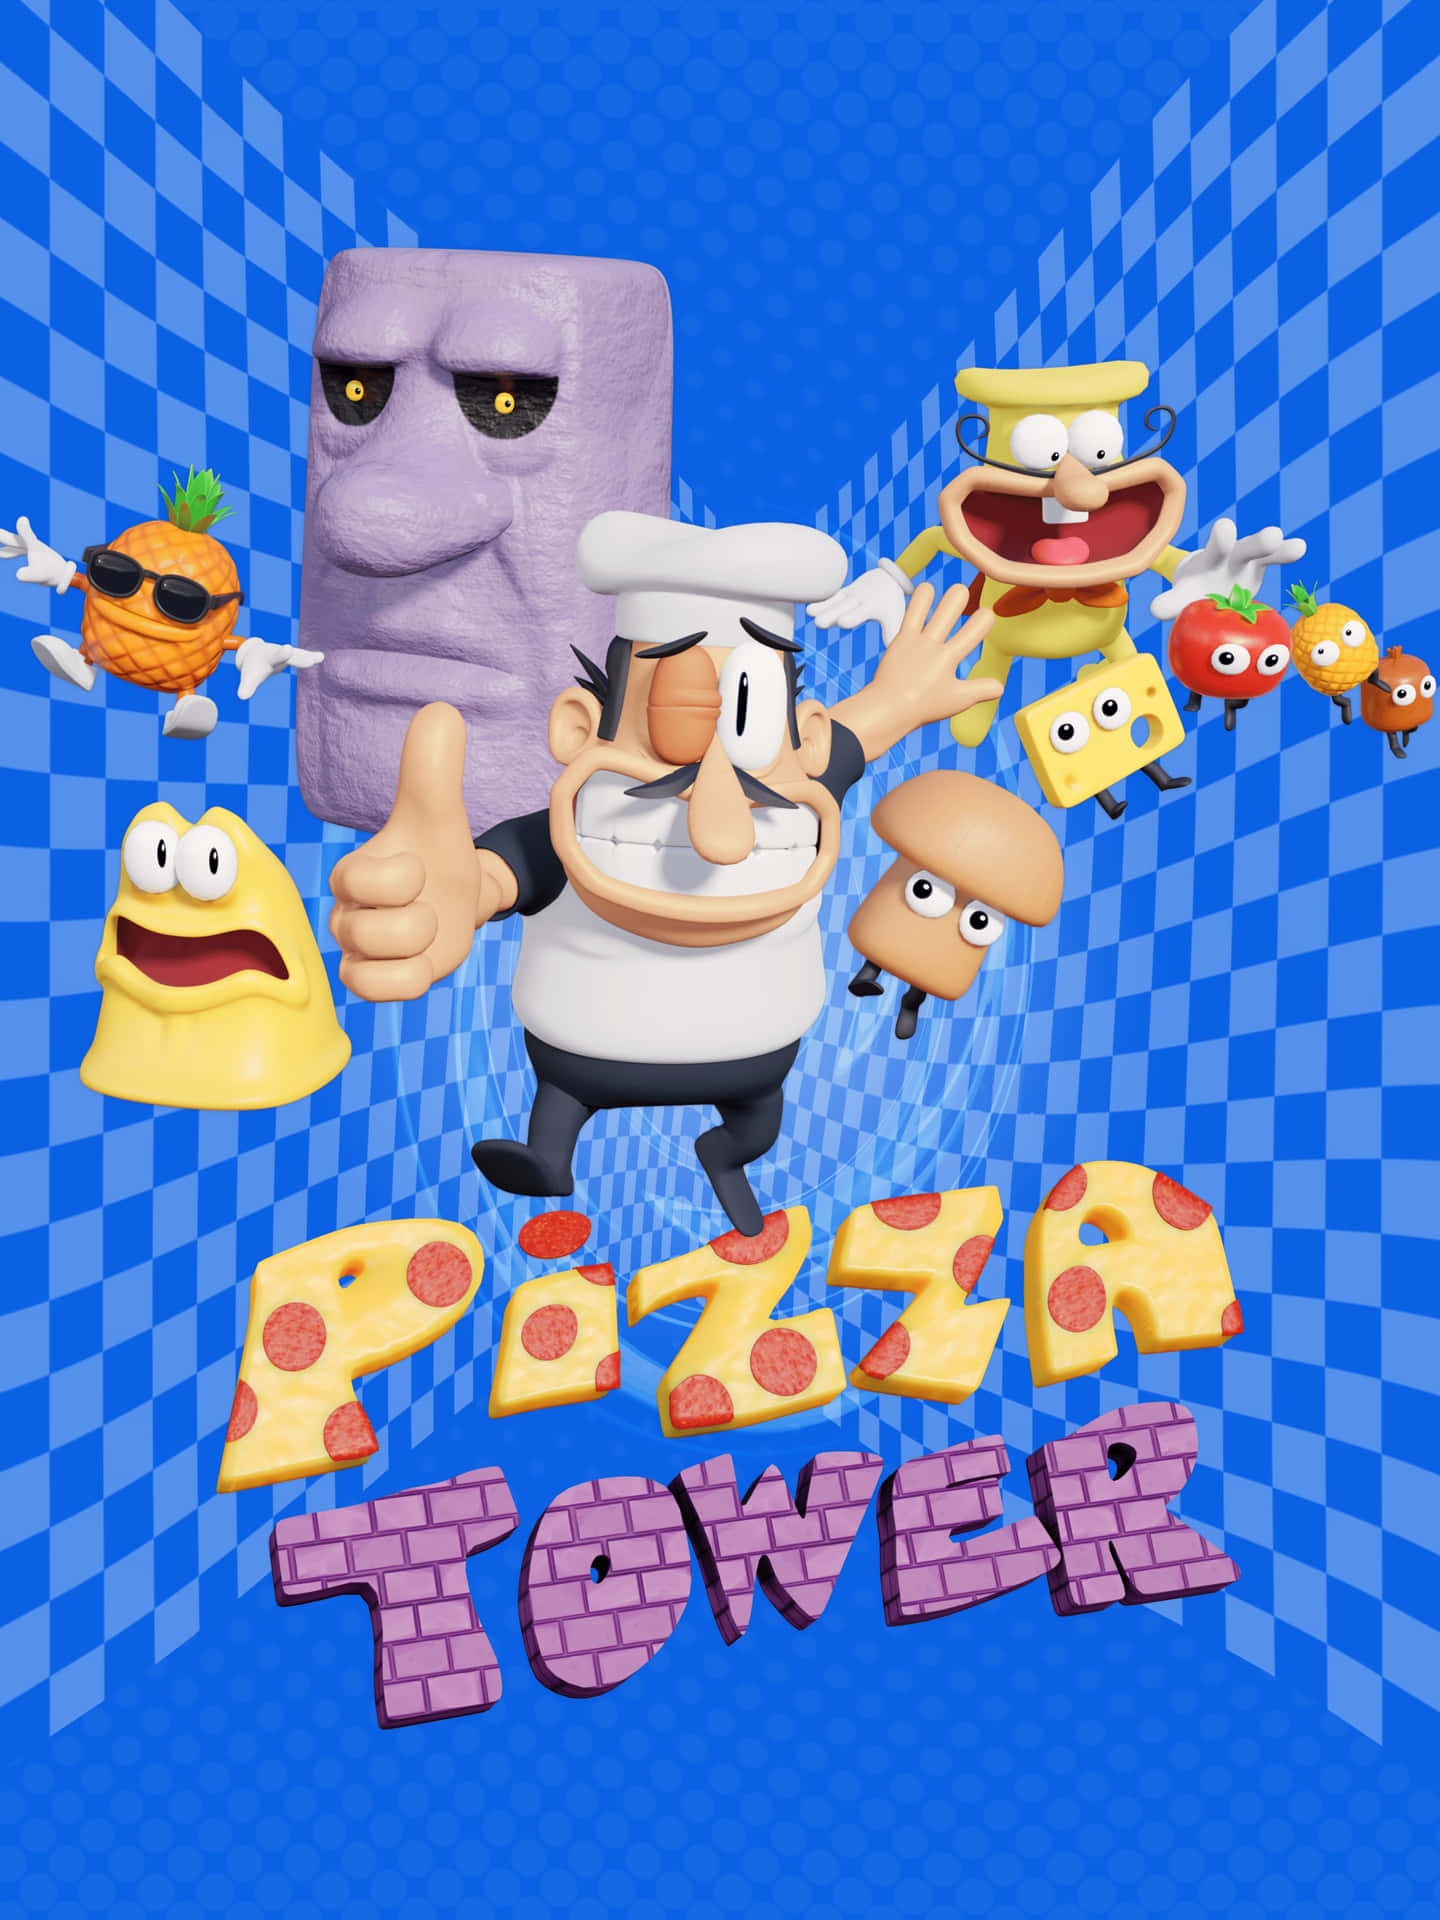 Pizza Tower Characters Promotional Art Wallpaper